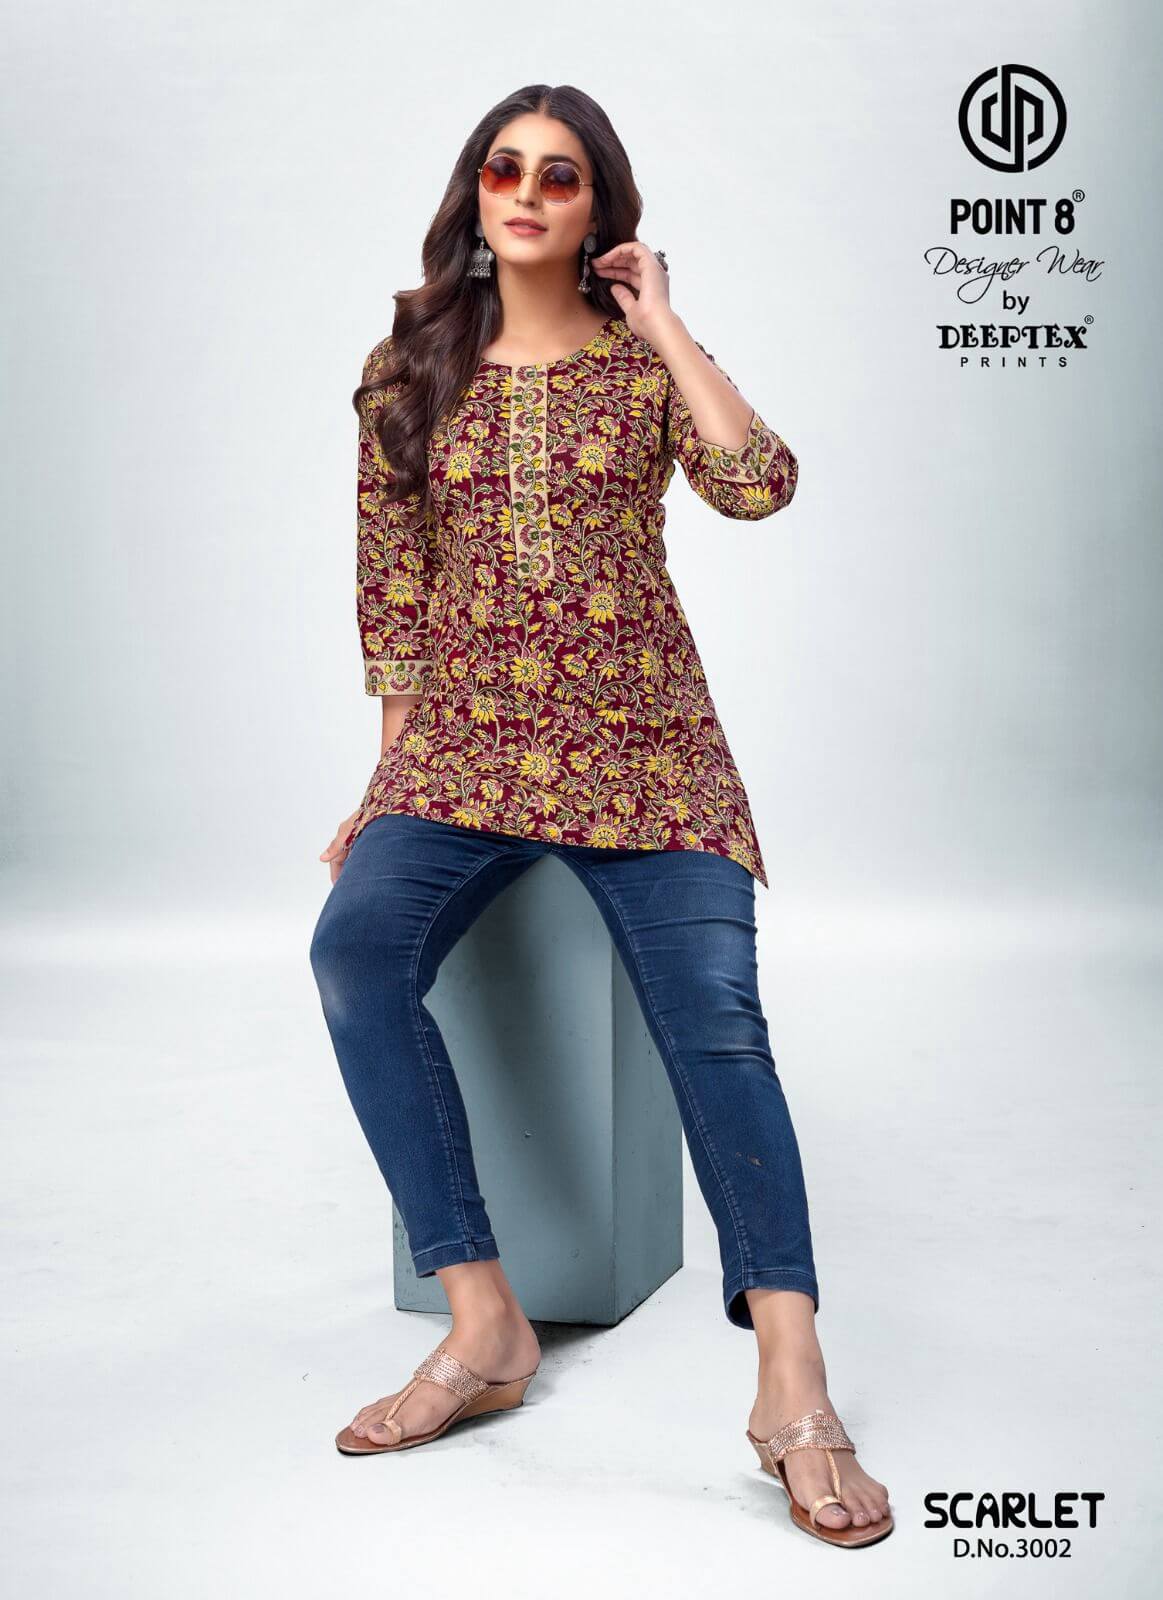 Deeptex Point 8 Scarlet Vol 3 Ladies Top Catalog collection 2